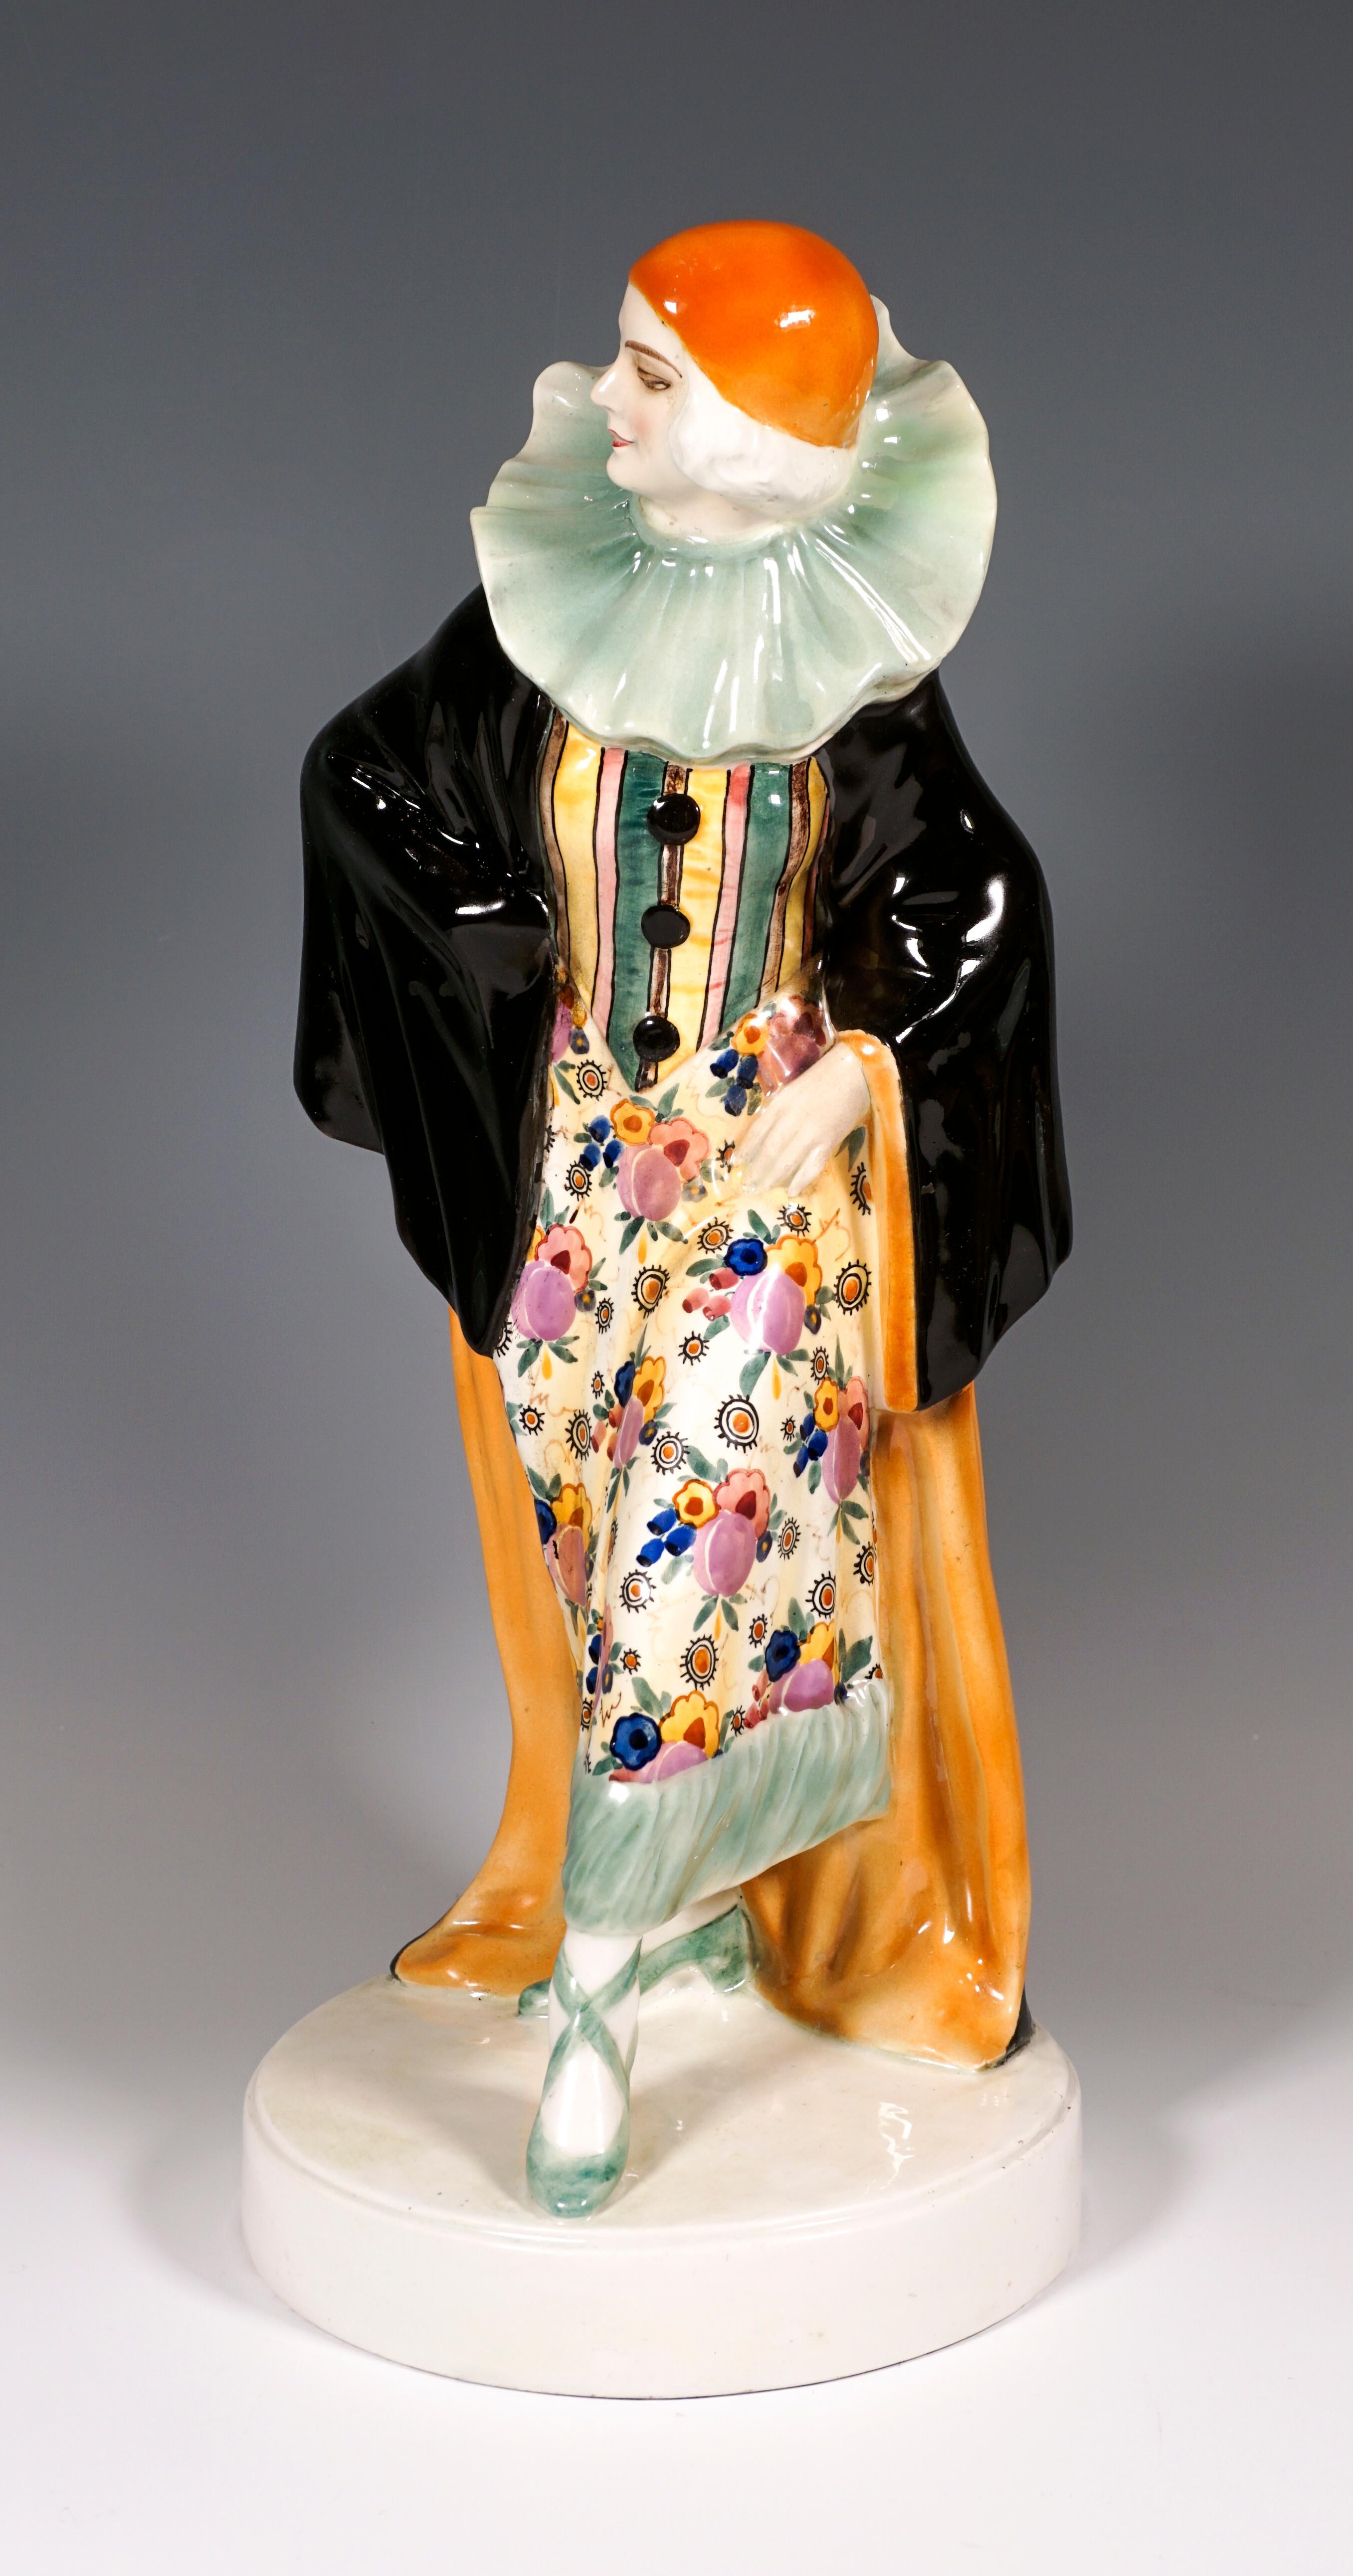 Rare Large Goldscheider Art Deco ceramic figure around 1925
Standing Pierrette, bent slightly forward, putting one foot in front of the other, supporting her hands on her hips, smiling and looking to the right. She wears a cap over her chin-length